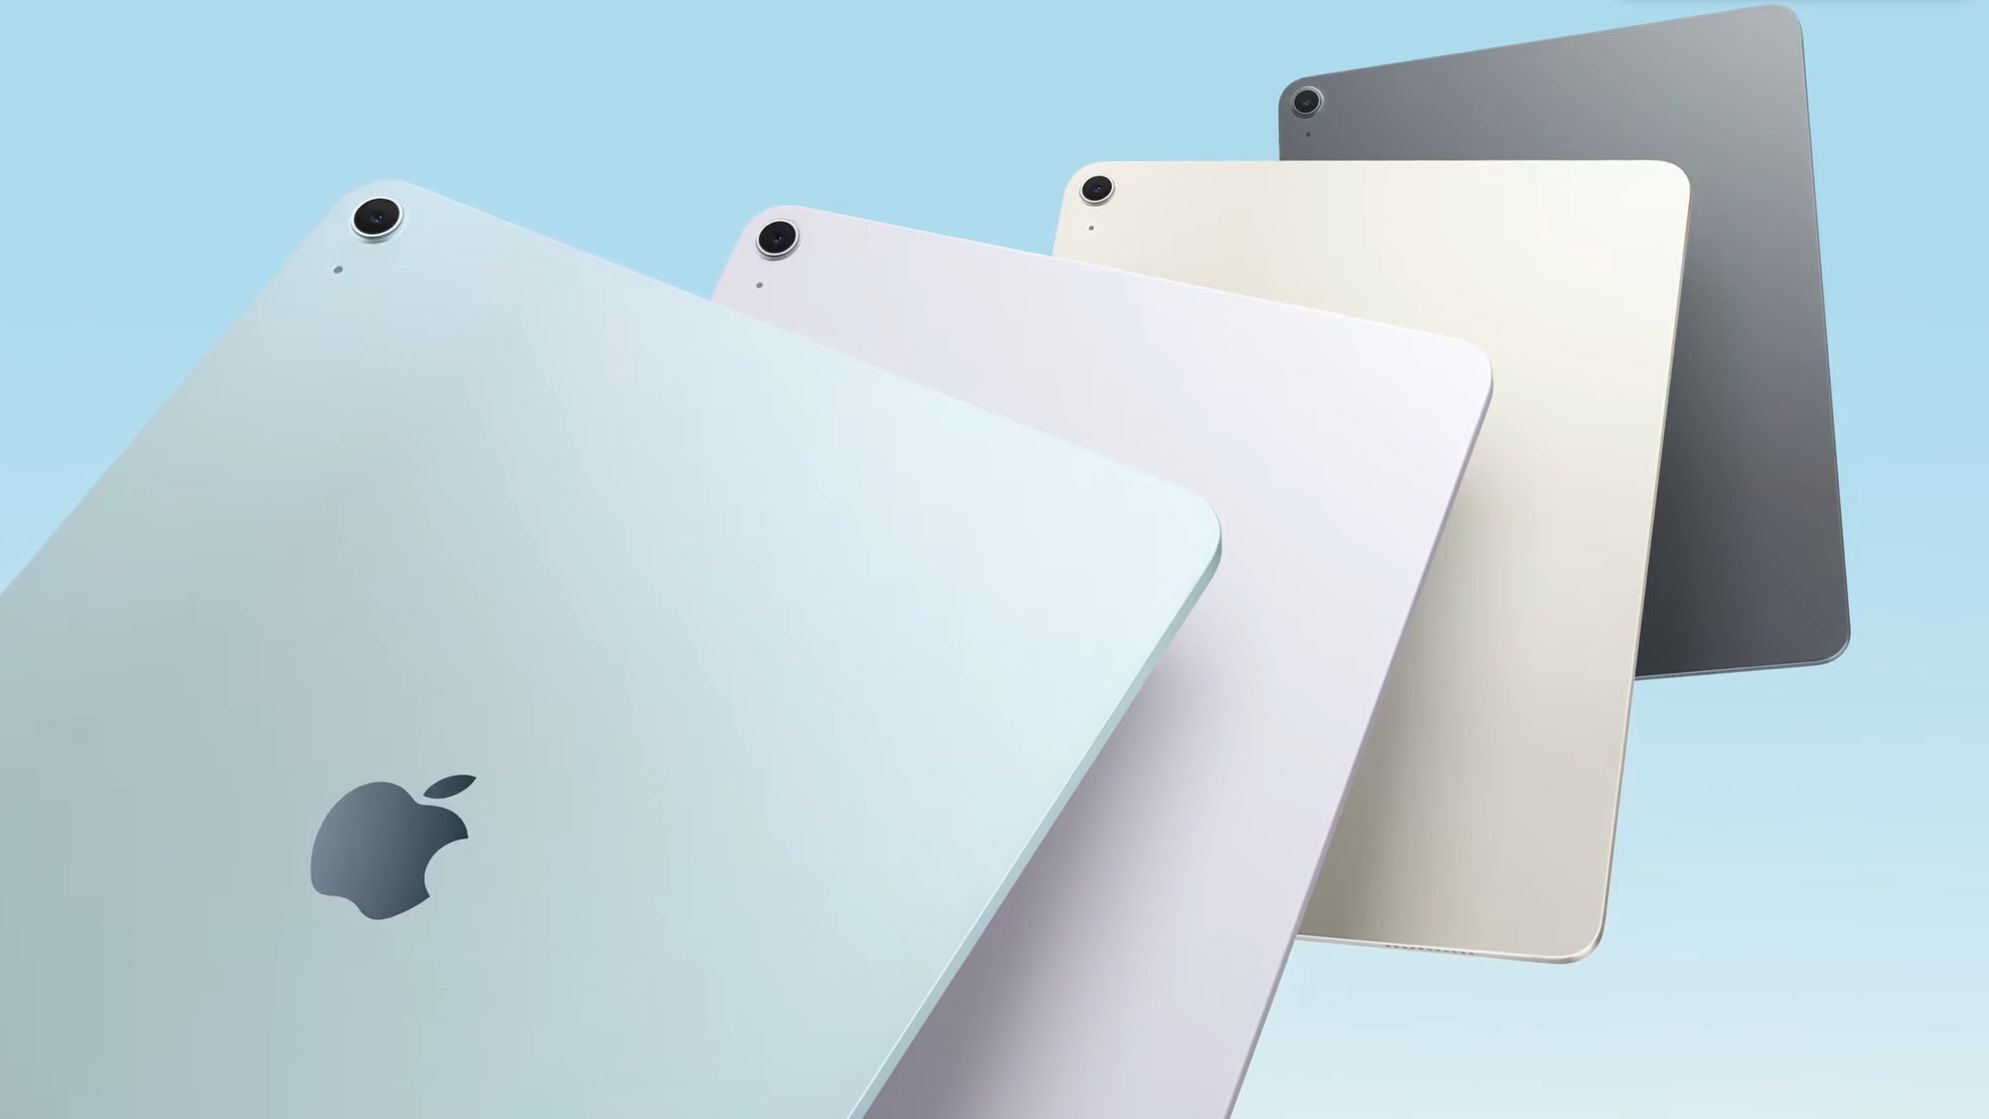 Apple adds more screen and power to the iPad Air lineup with a 13-inch model and M2 silicon